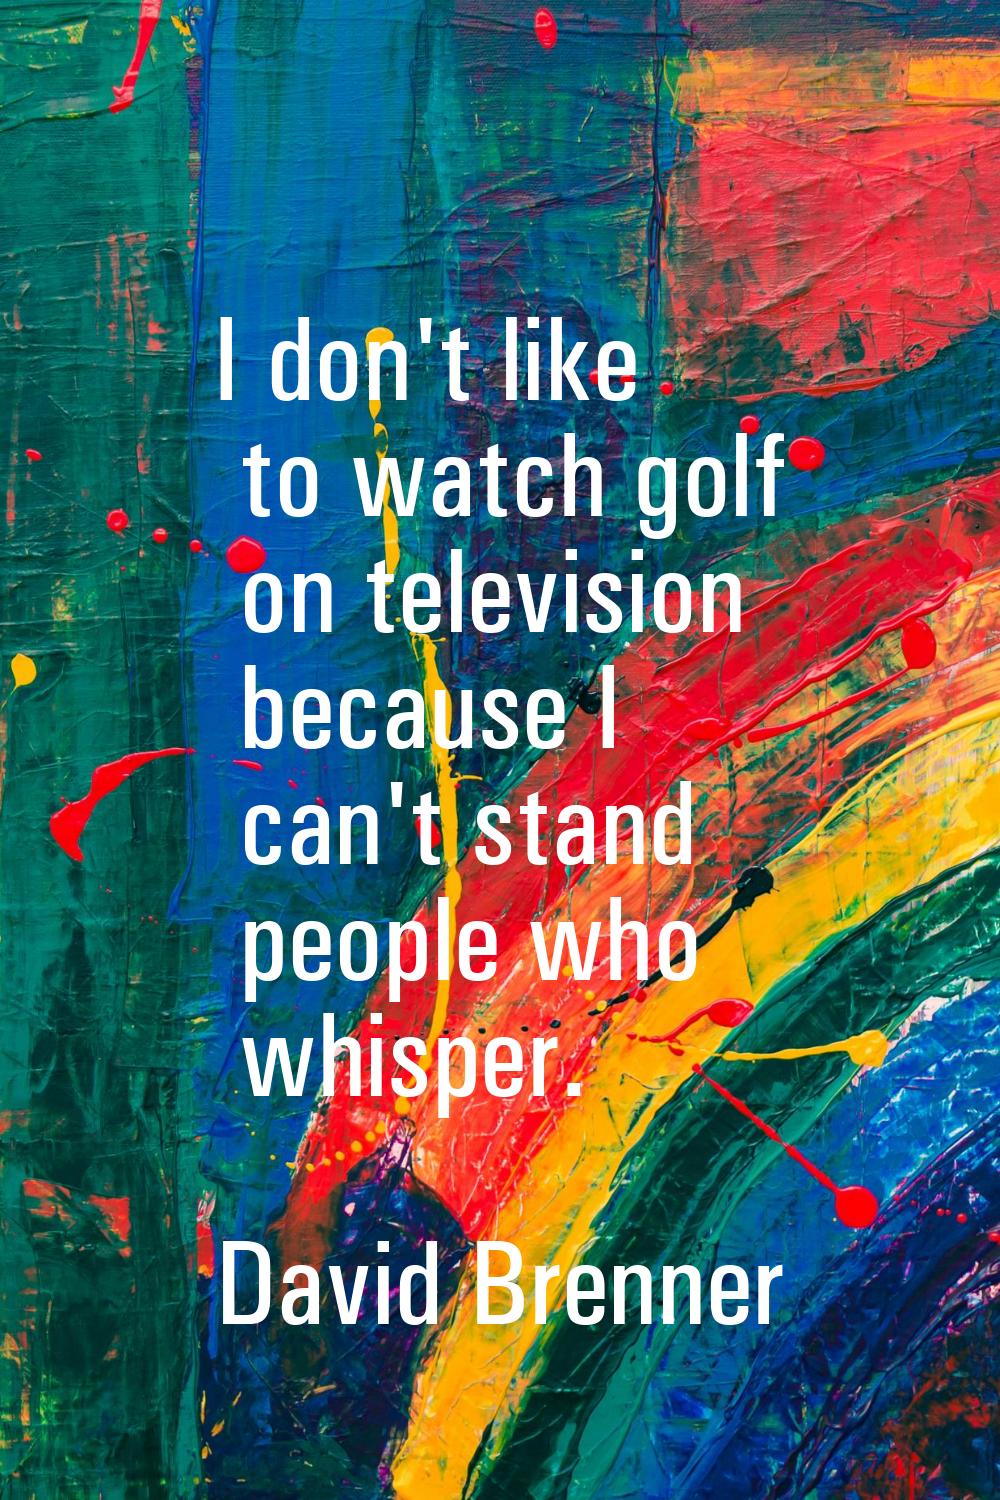 I don't like to watch golf on television because I can't stand people who whisper.